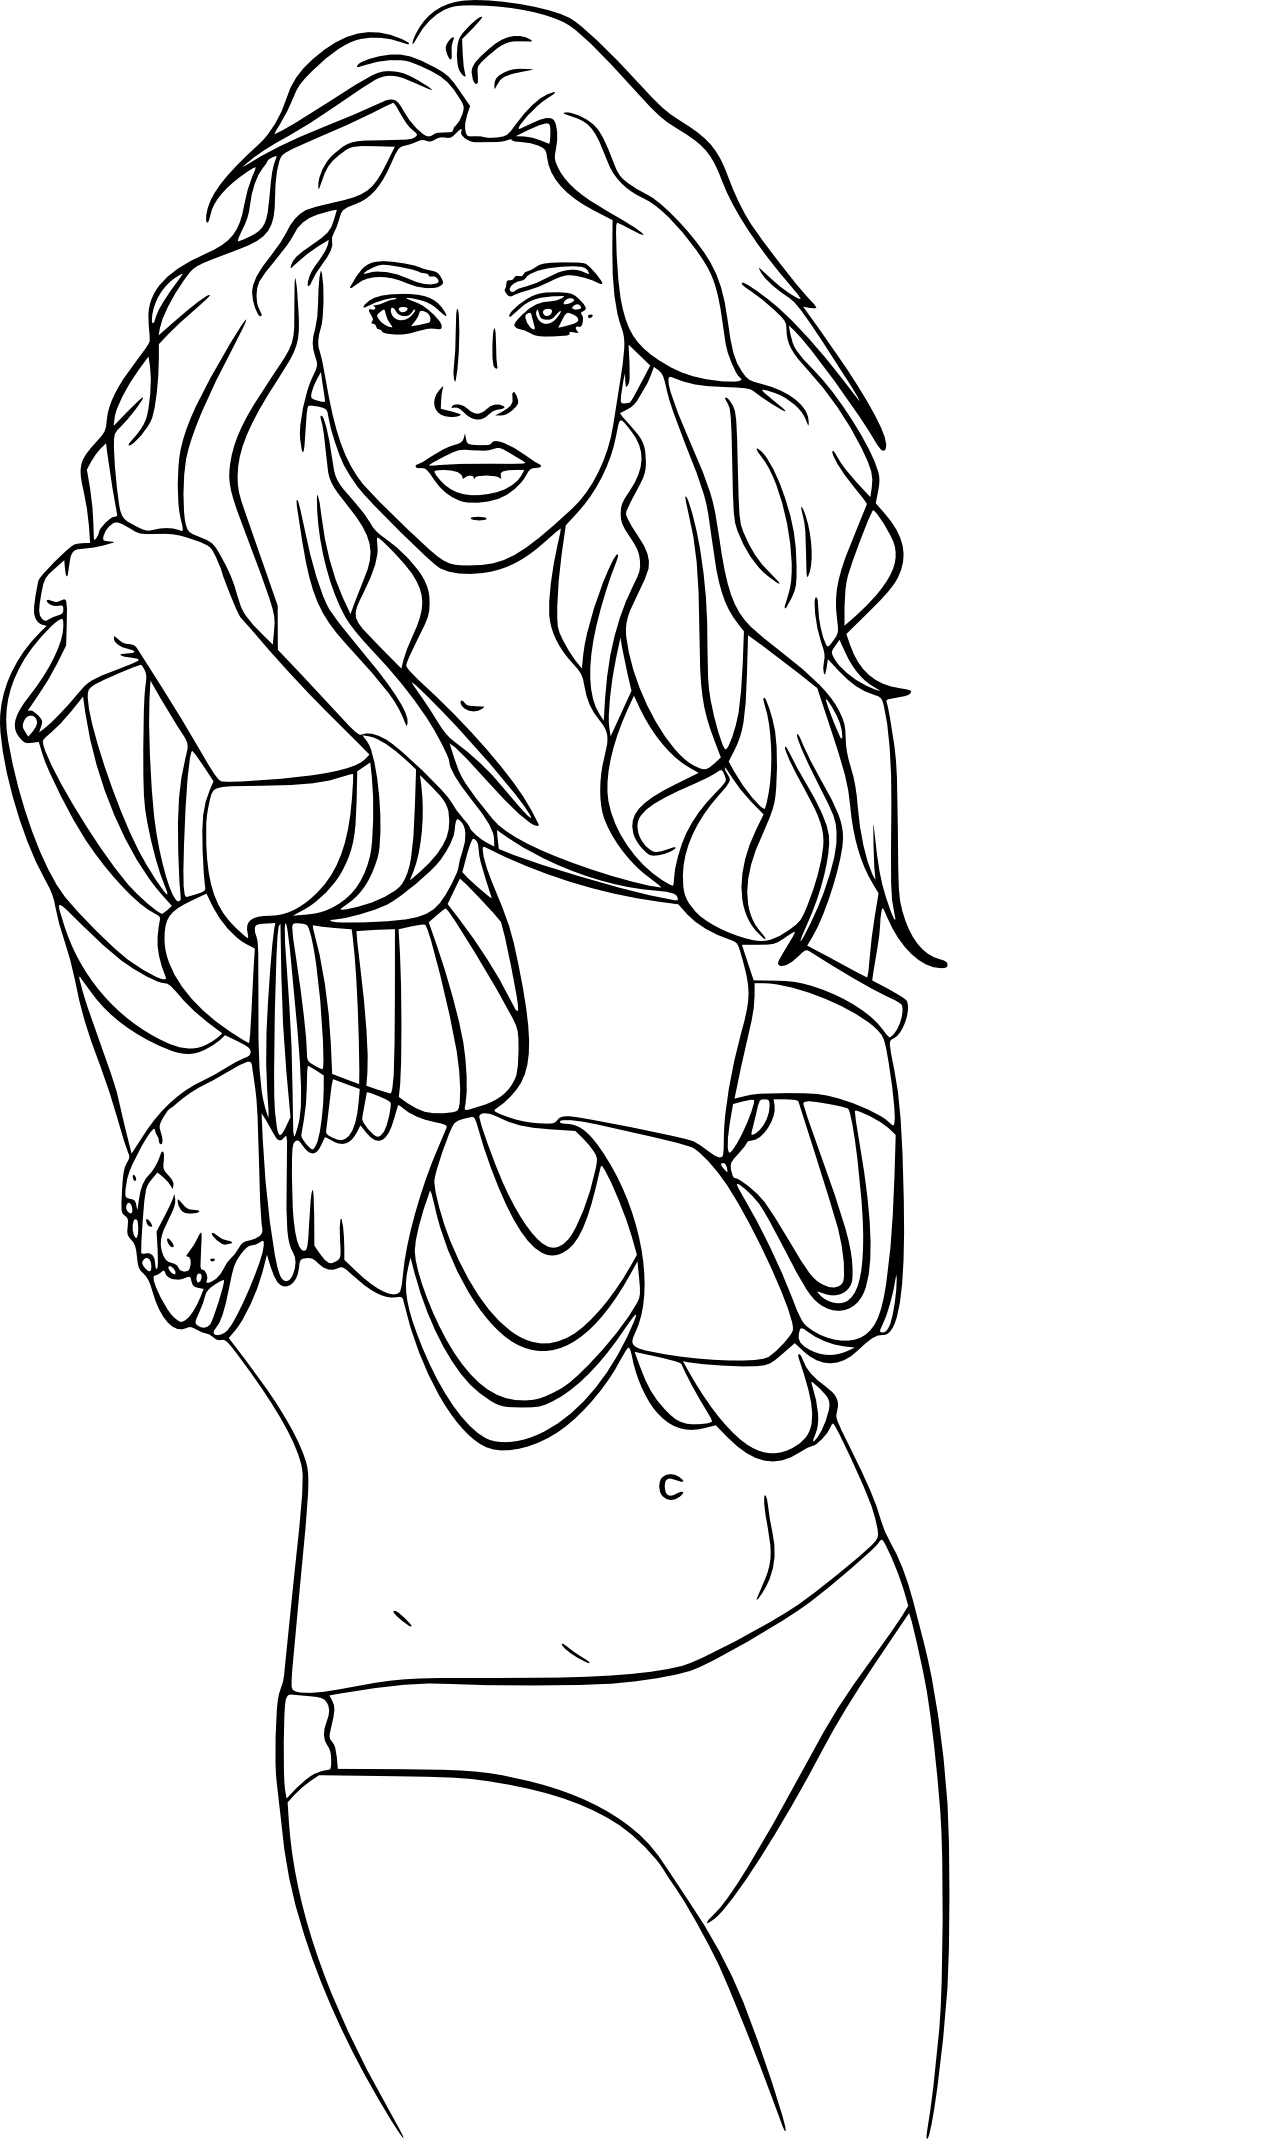 Shakira coloring page - free printable coloring pages on 